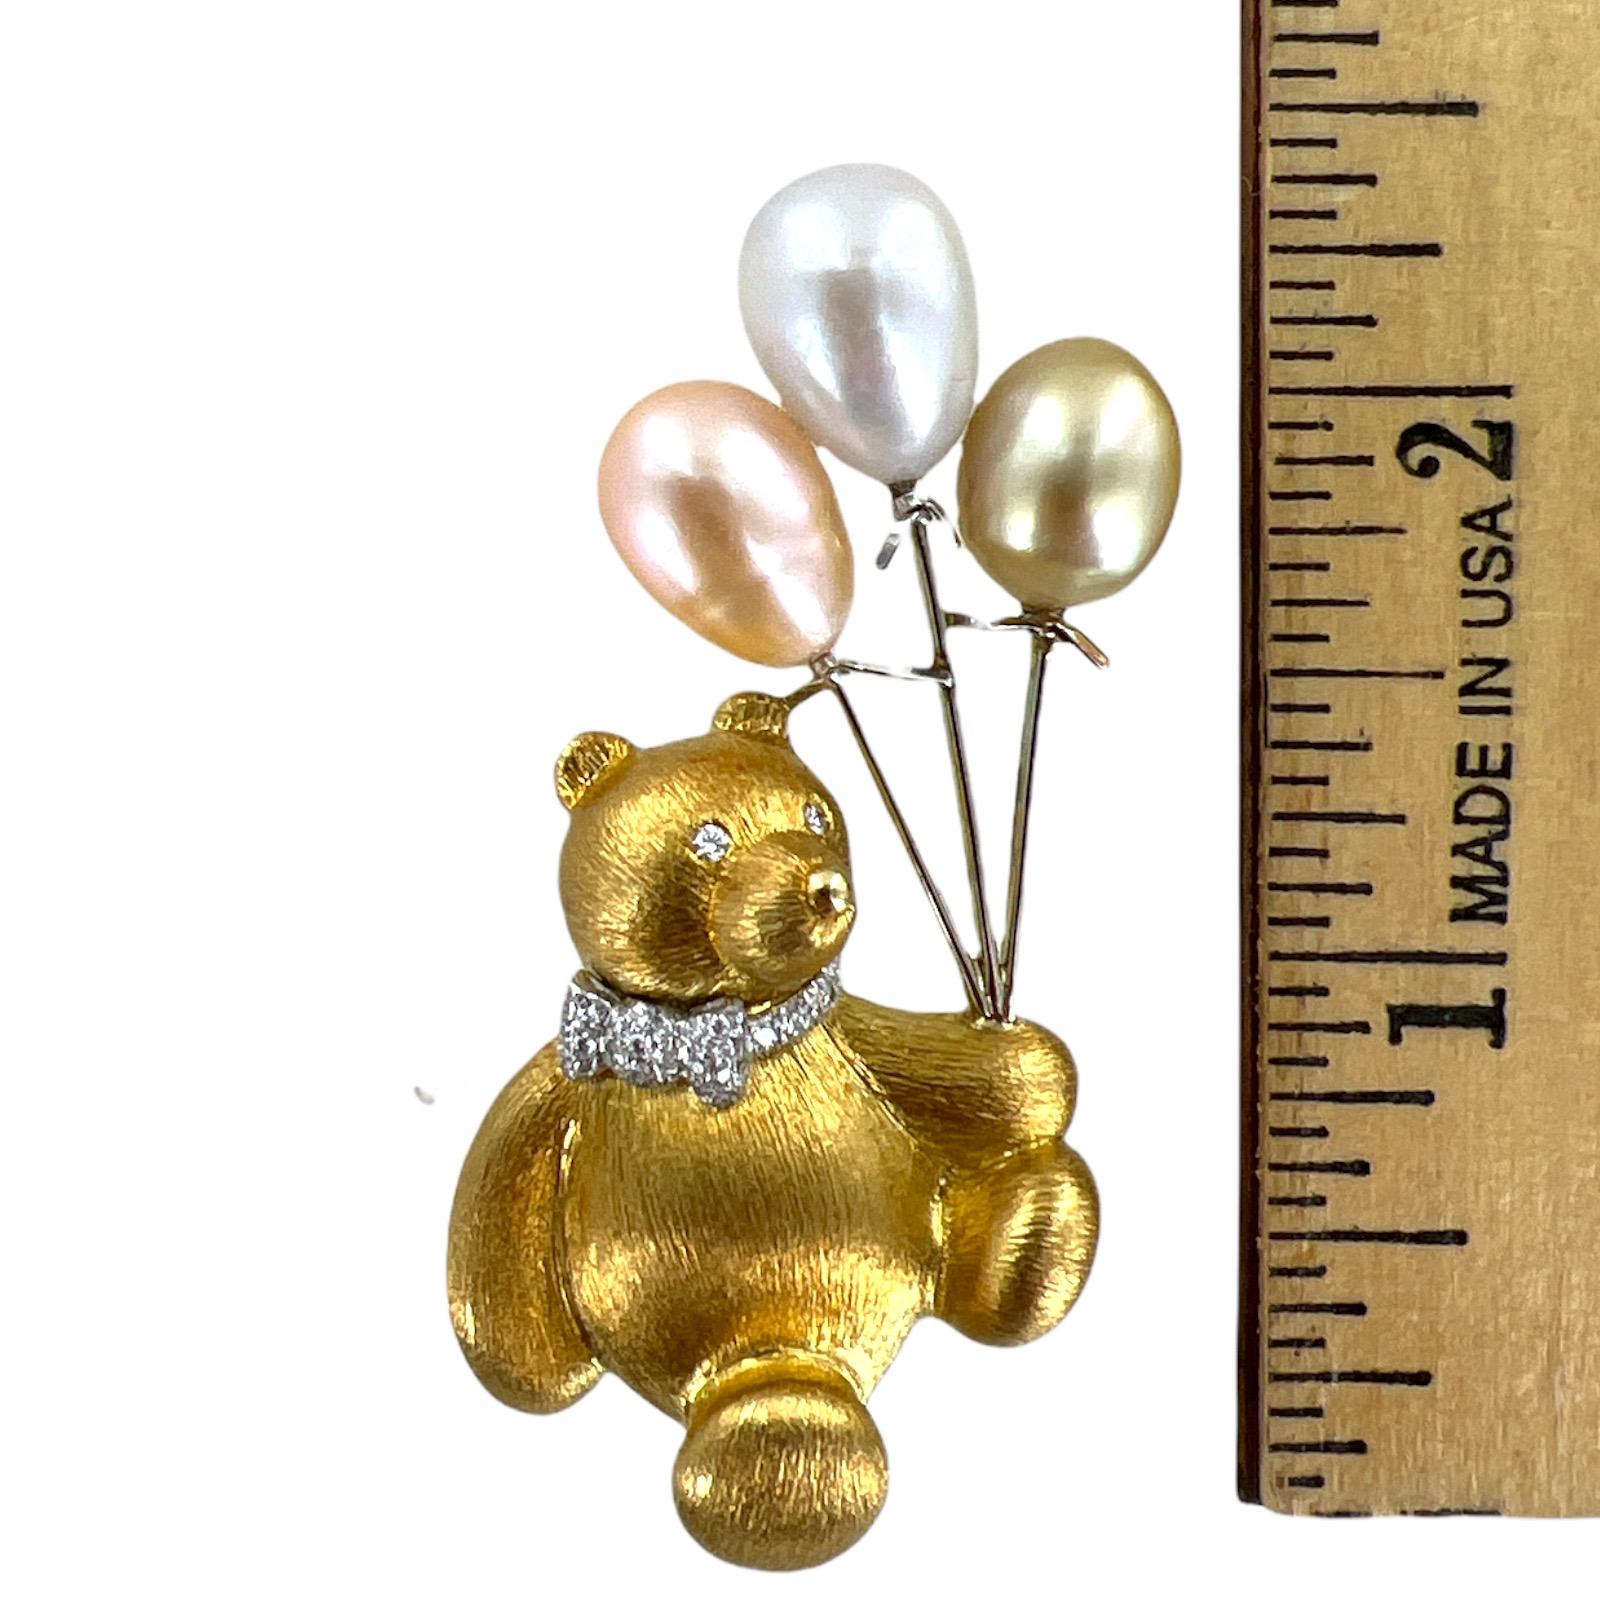 The brooch depicts an adorablle teddy bear with diamond collar and eyes carrying balloons. The pin features 45 round brilliant cut diamonds weighing approximately .25 CTW and graded F-G color and VS clarity. The bear is holding three pearl balloons